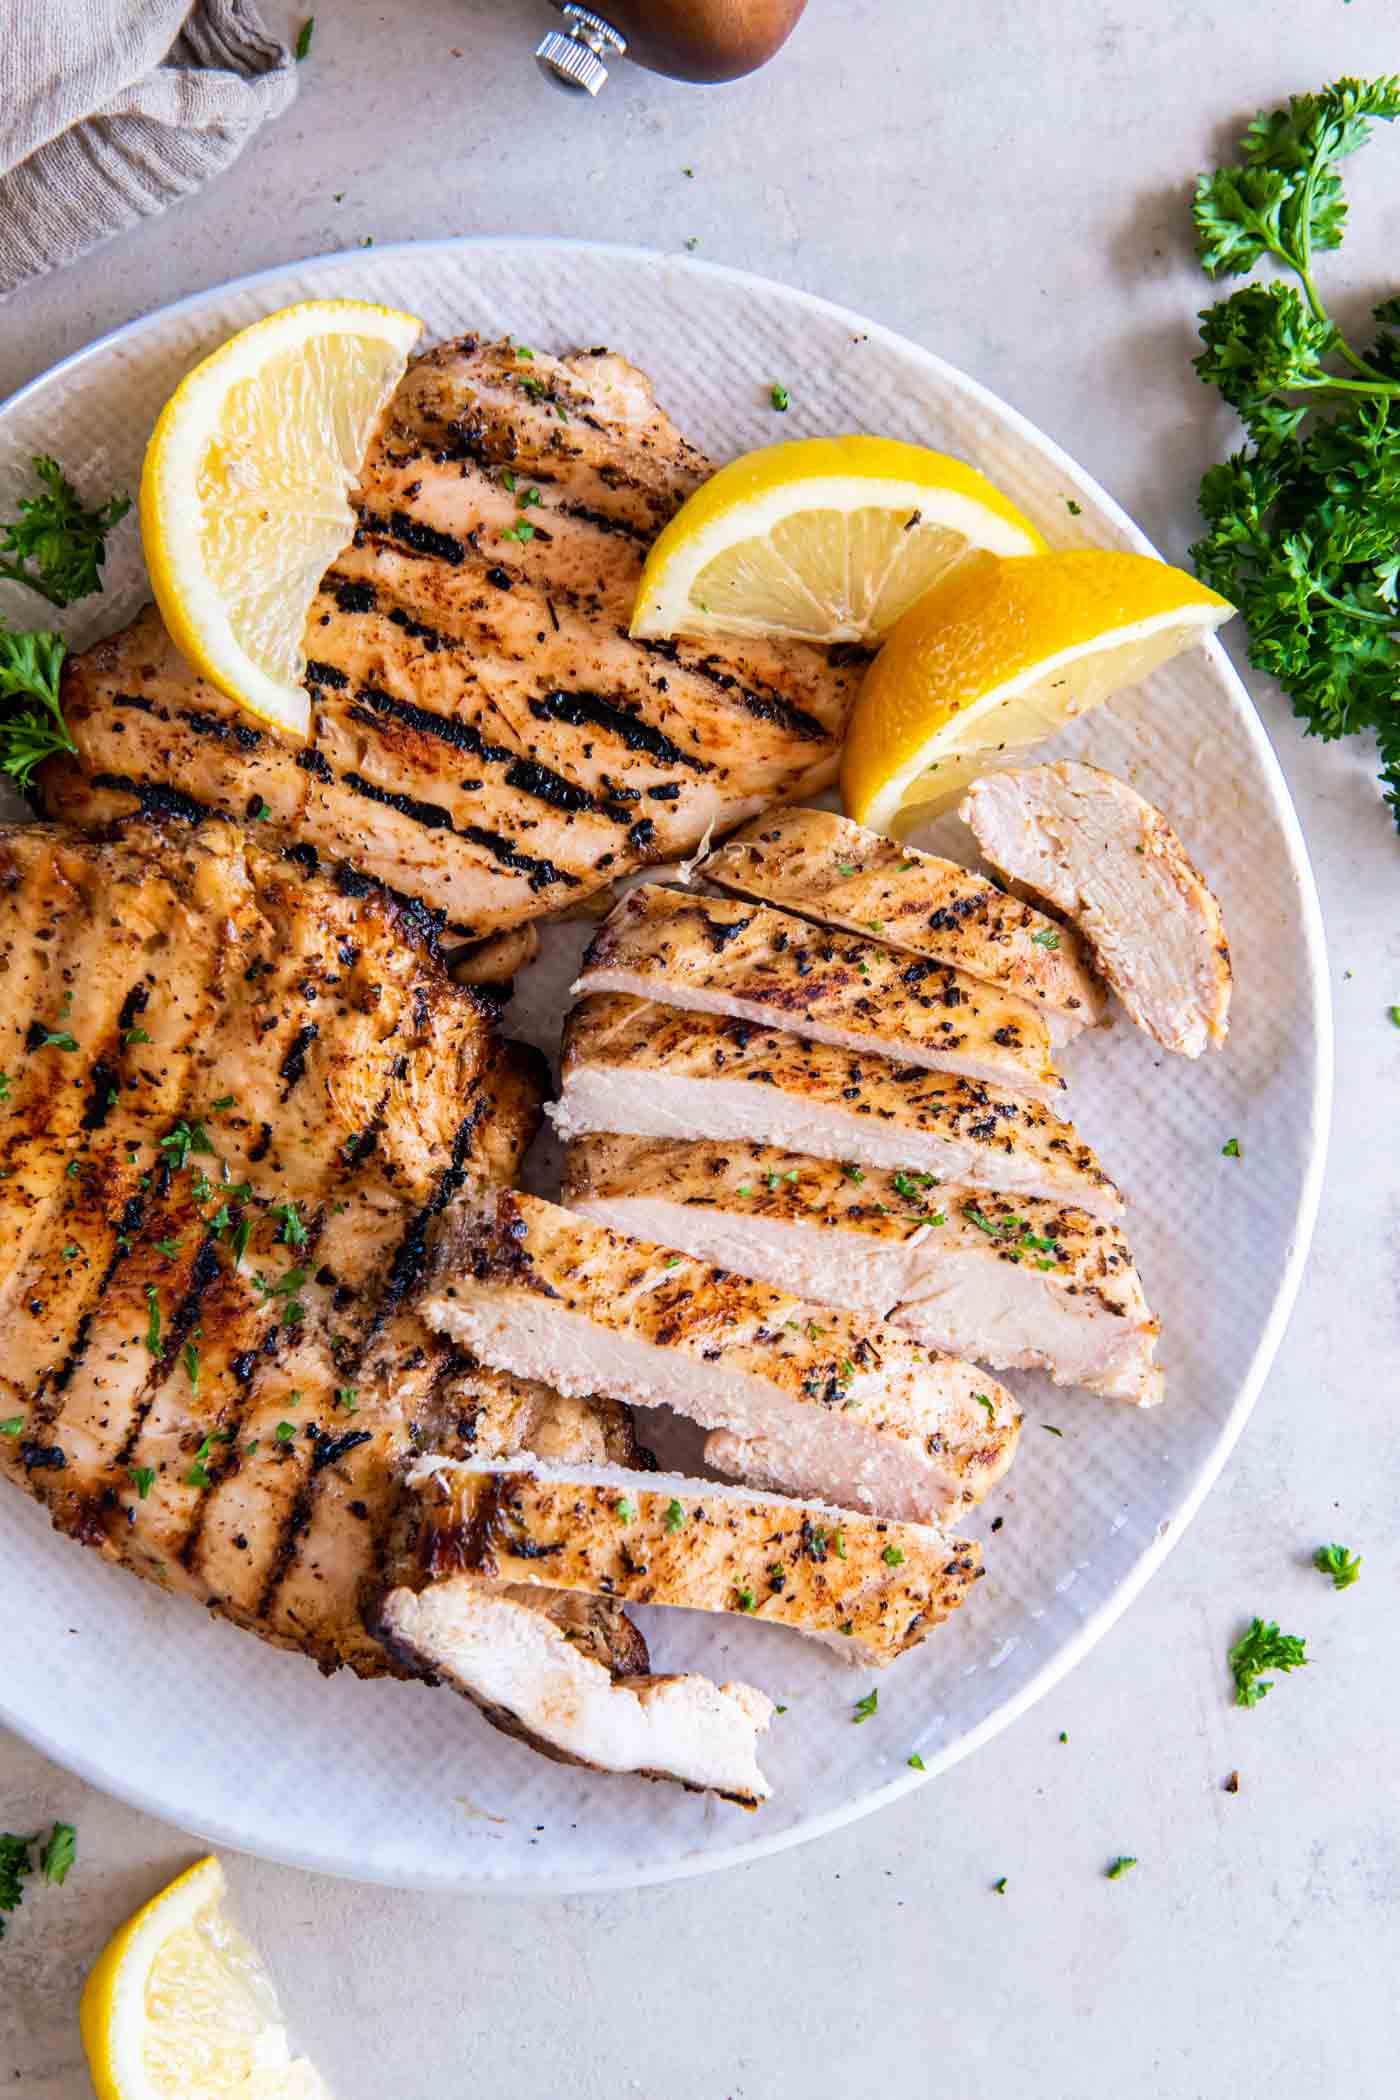 Grilled chicken breasts on a plate with one breast sliced and lemon wedges for garnish.